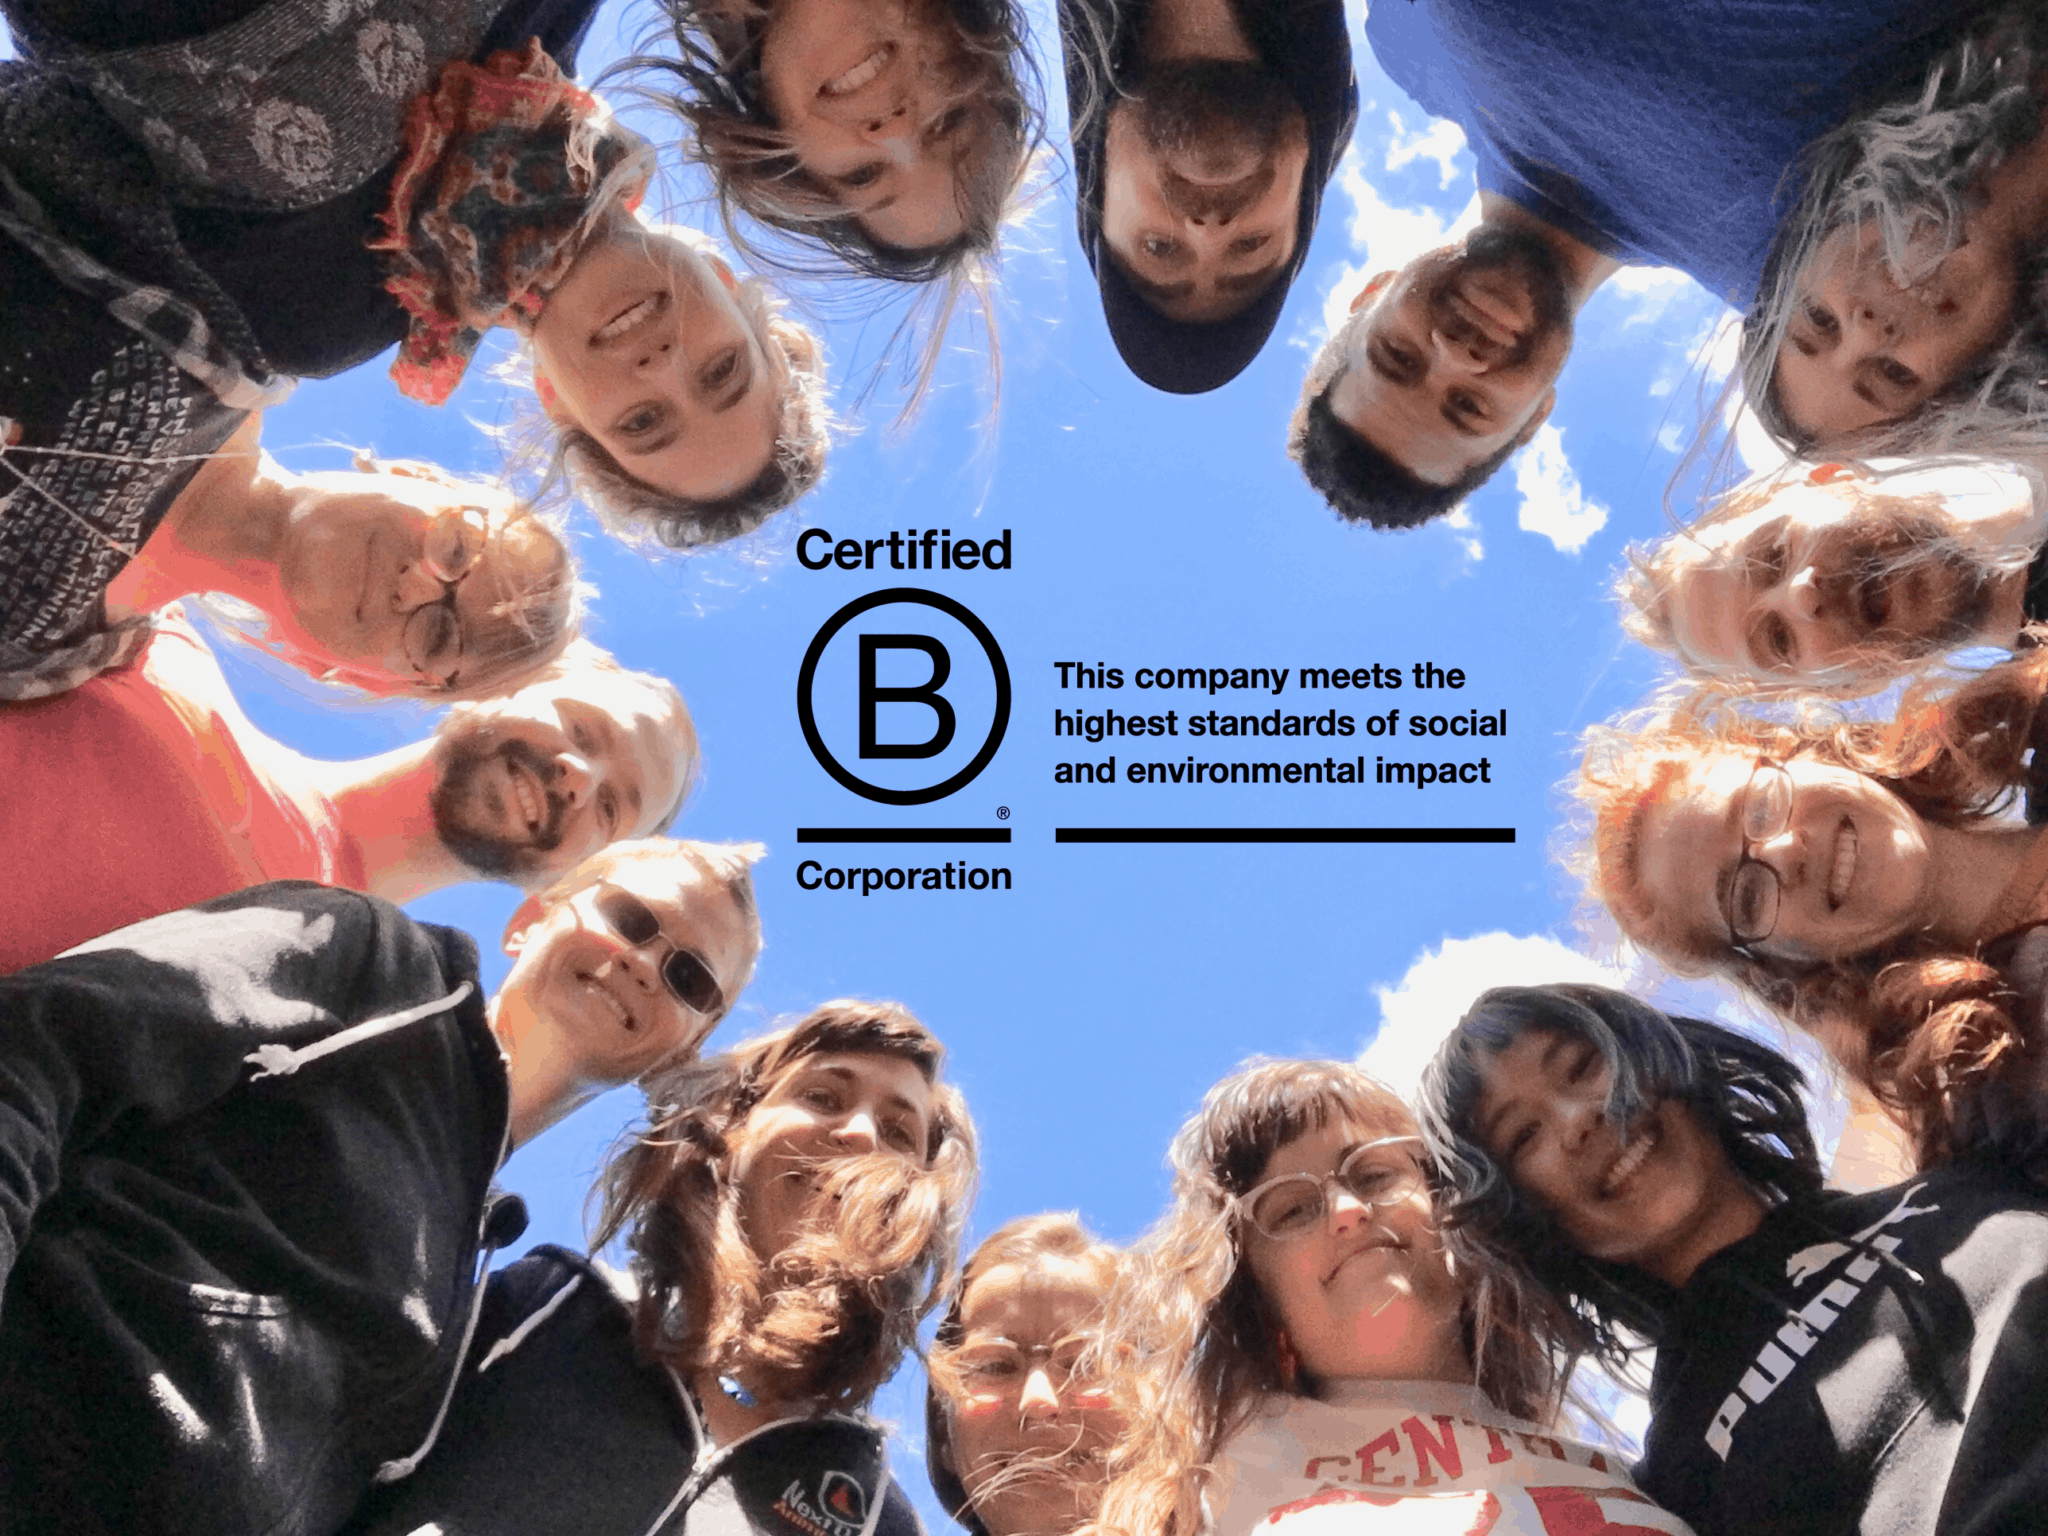 The NDA team smiles together in a portrait, taken from below them - their faces smile down from above with the BCorp logo in the center.